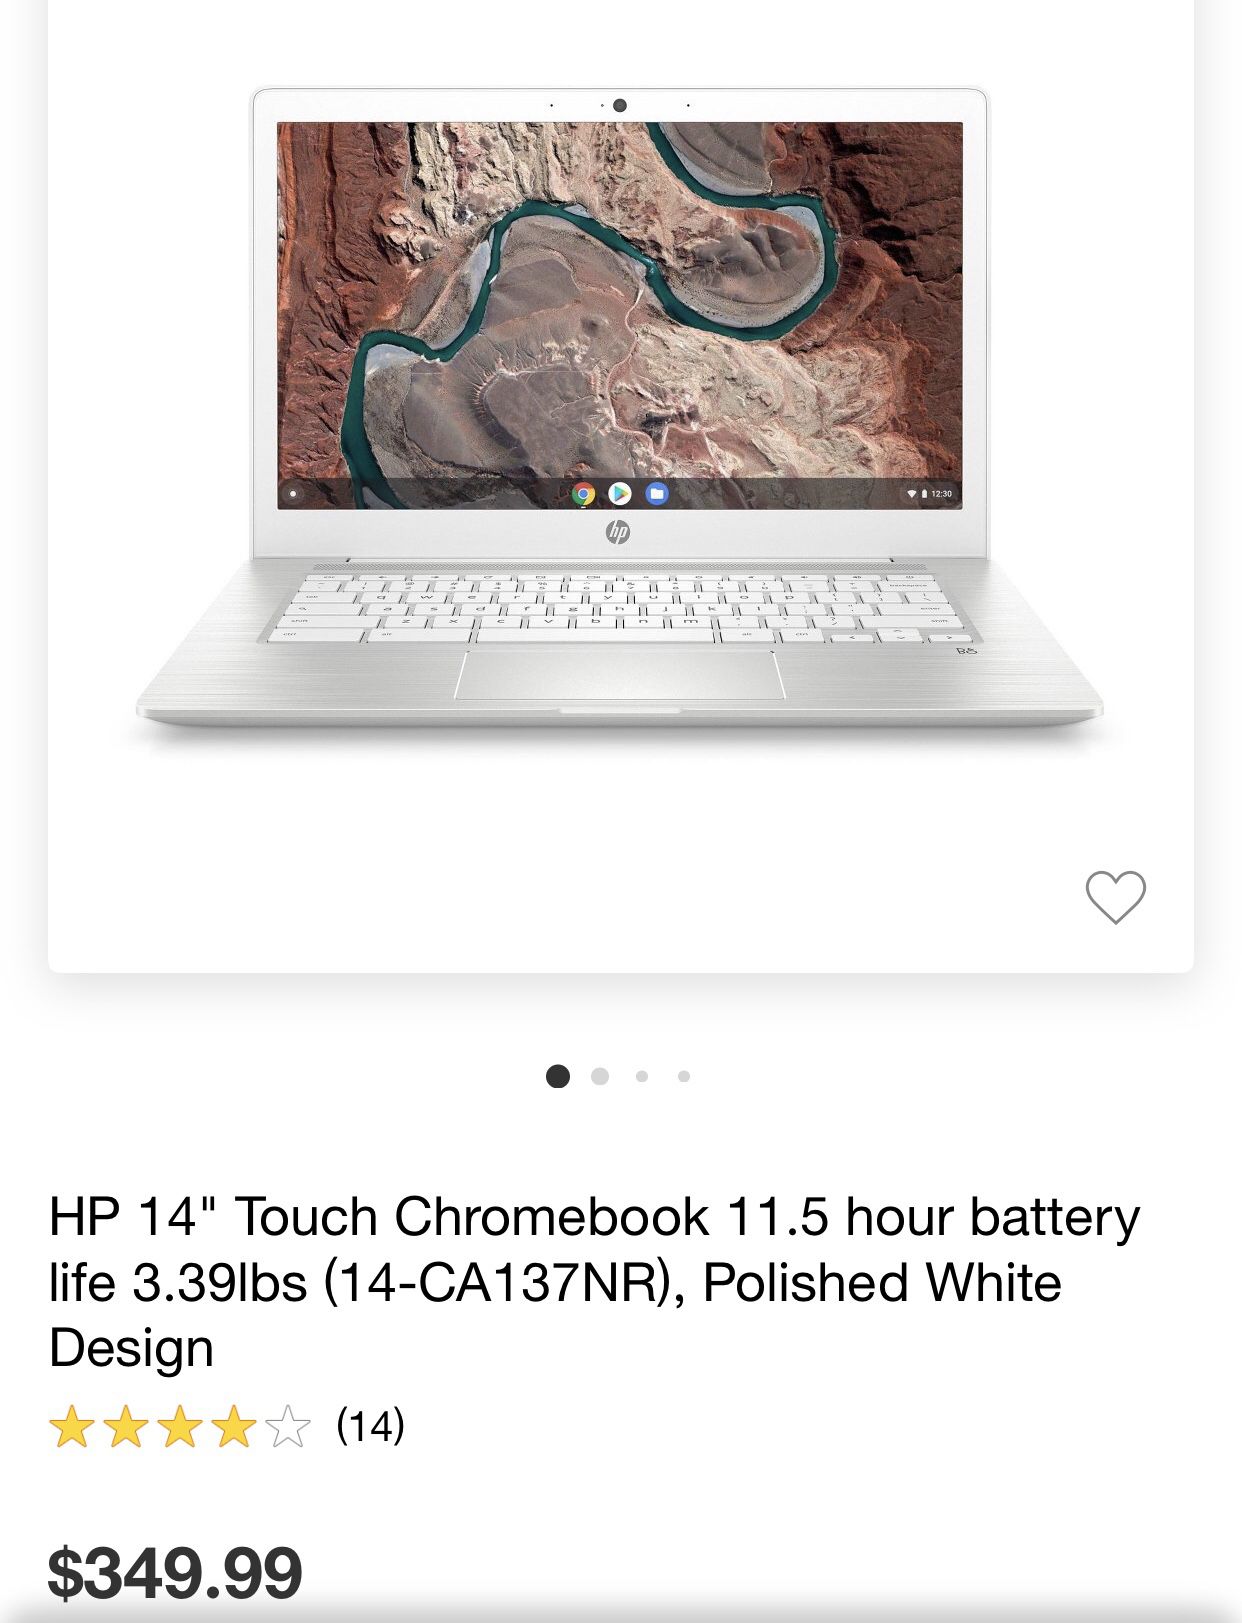 HP TOUCH CHROMEBOOK